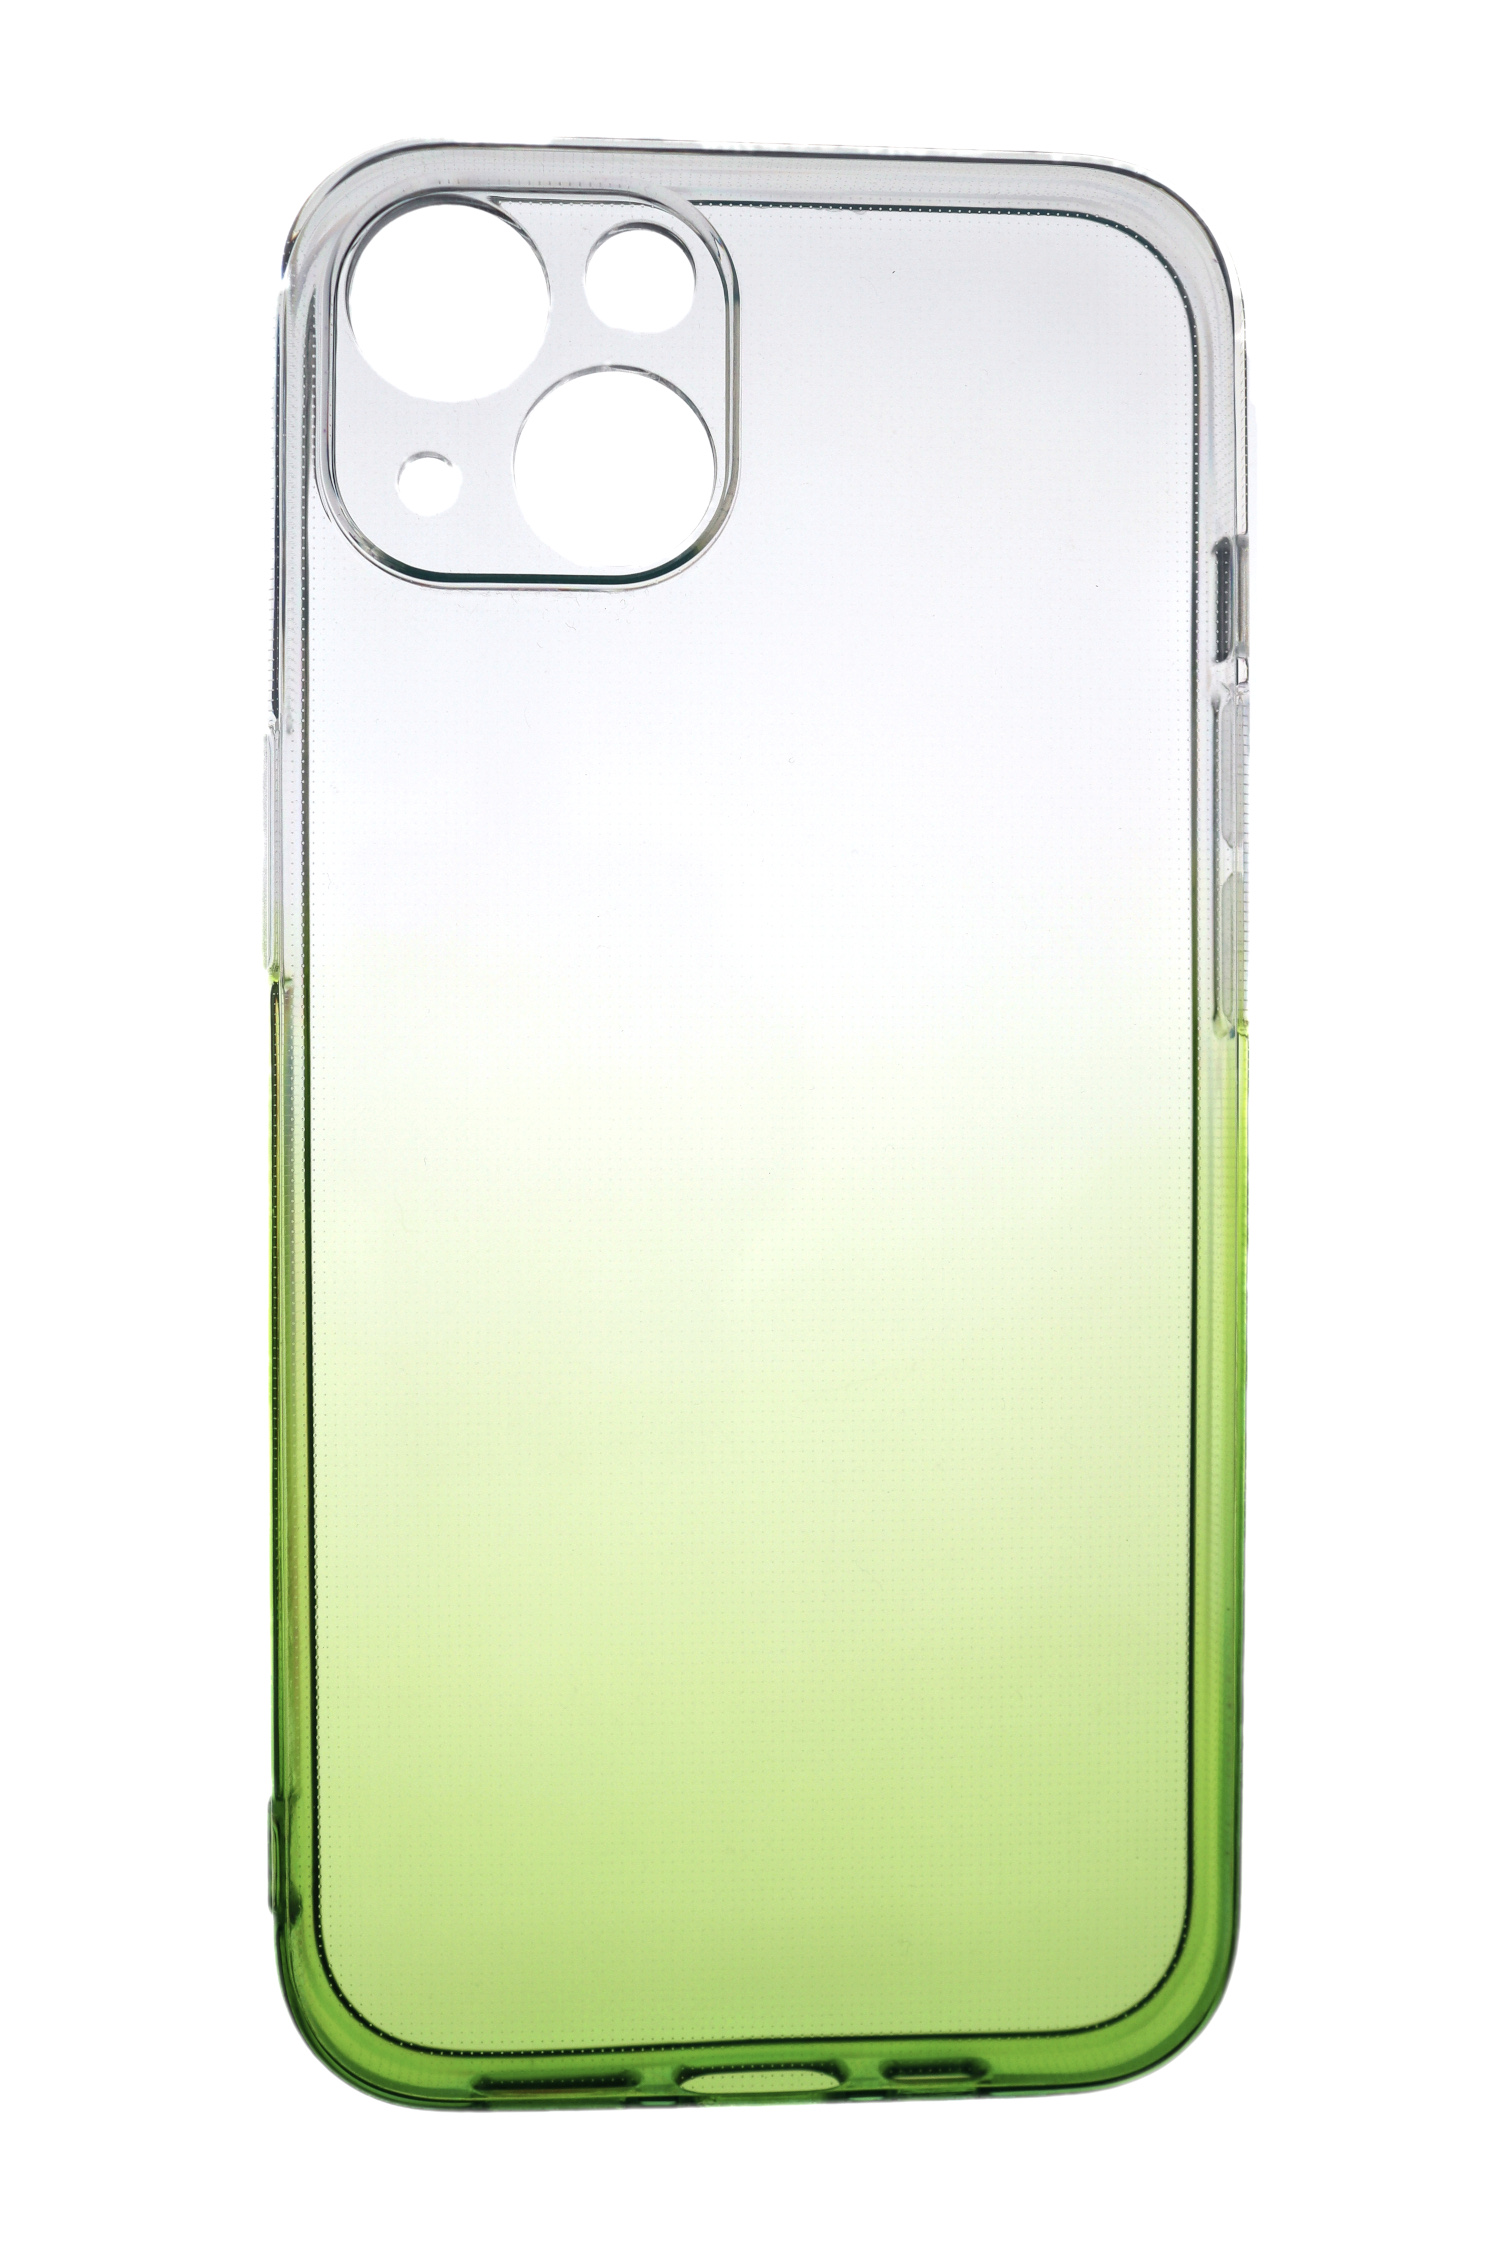 JAMCOVER 2.0 mm TPU iPhone Backcover, Transparent Case Grün, 14, Apple, Strong